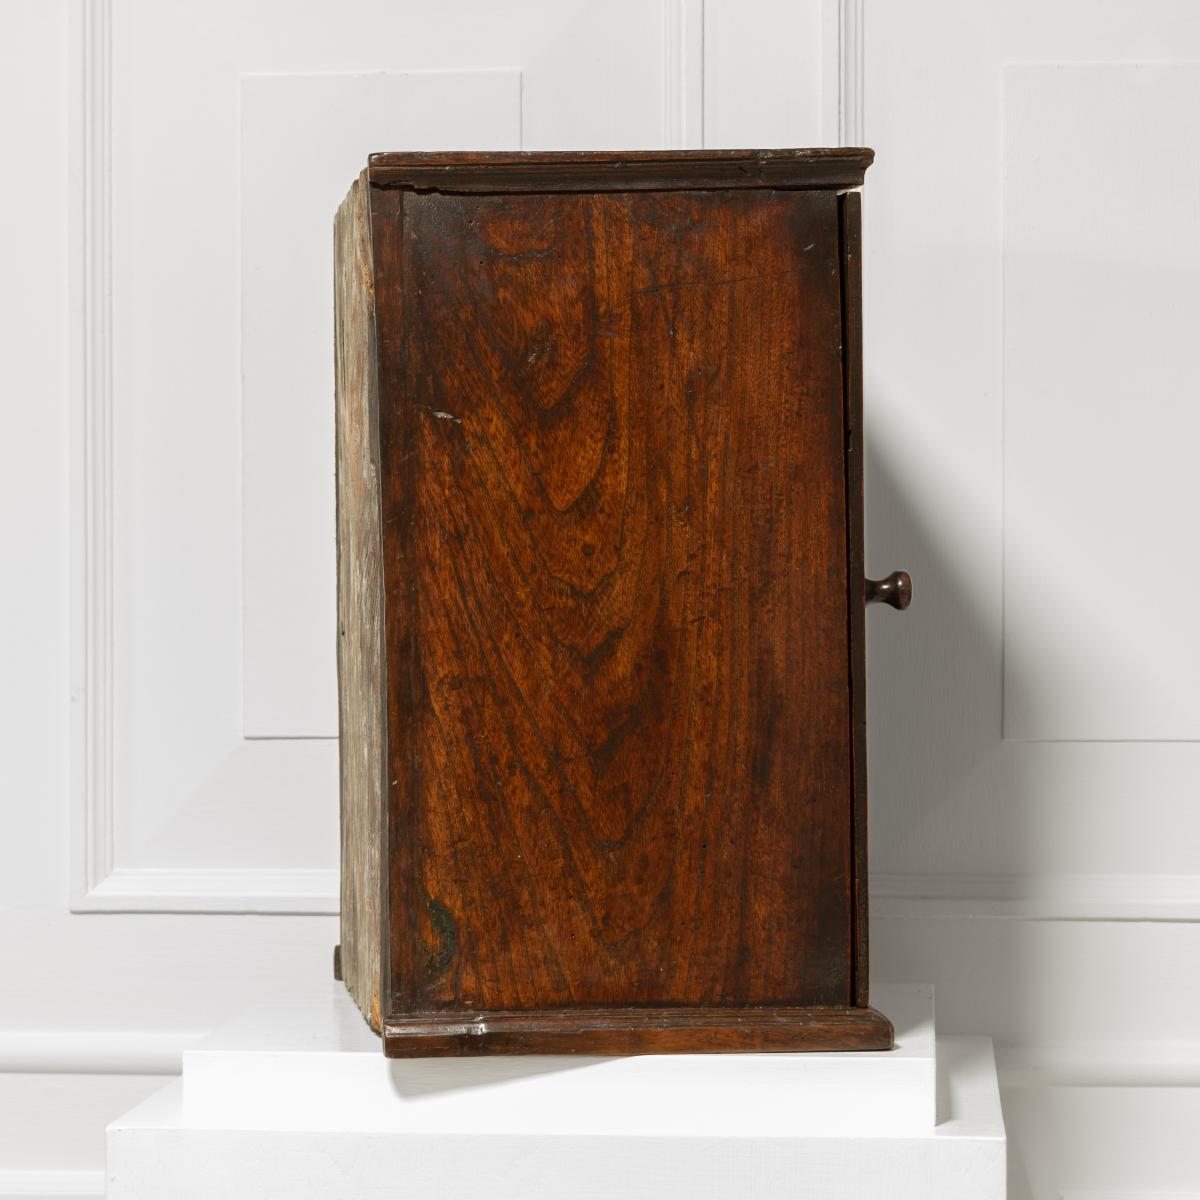 An early 18th century fruitwood and elm table-top spice cupboard, English or Welsh, circa 1700-20